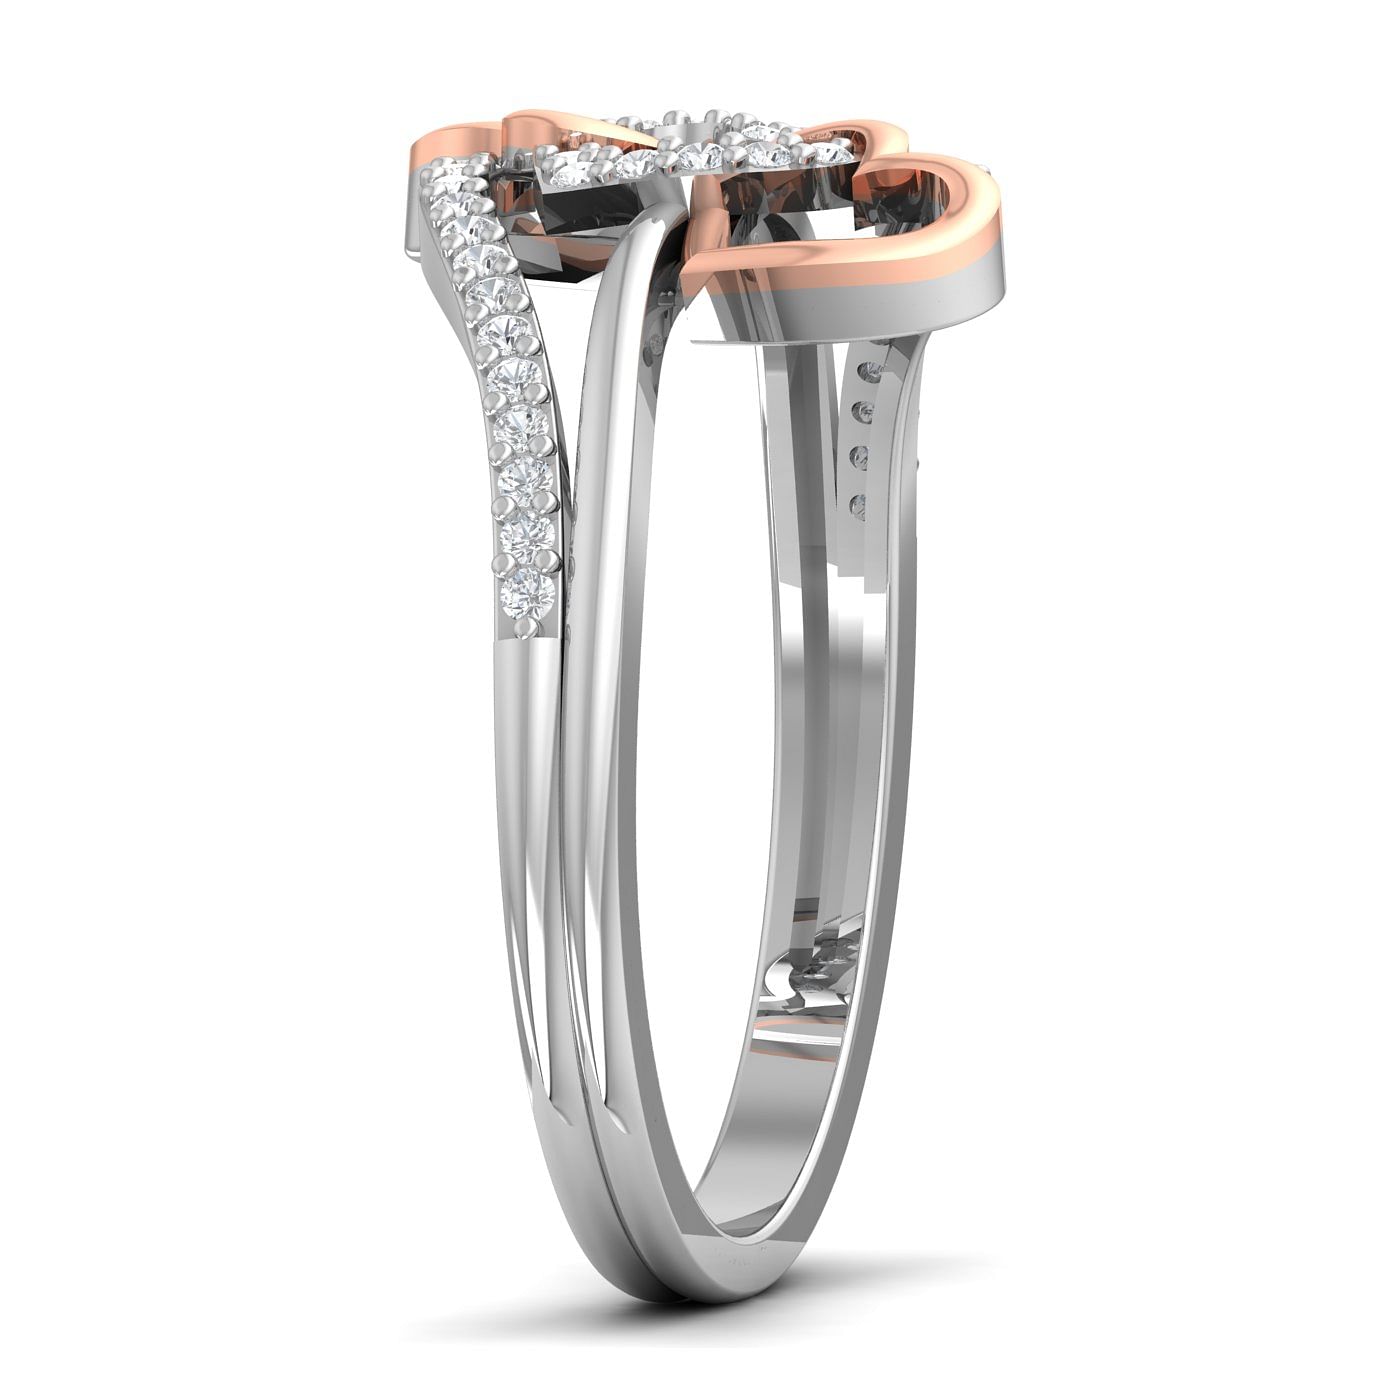 10k White Gold Love triangle Wedding Ring For Her